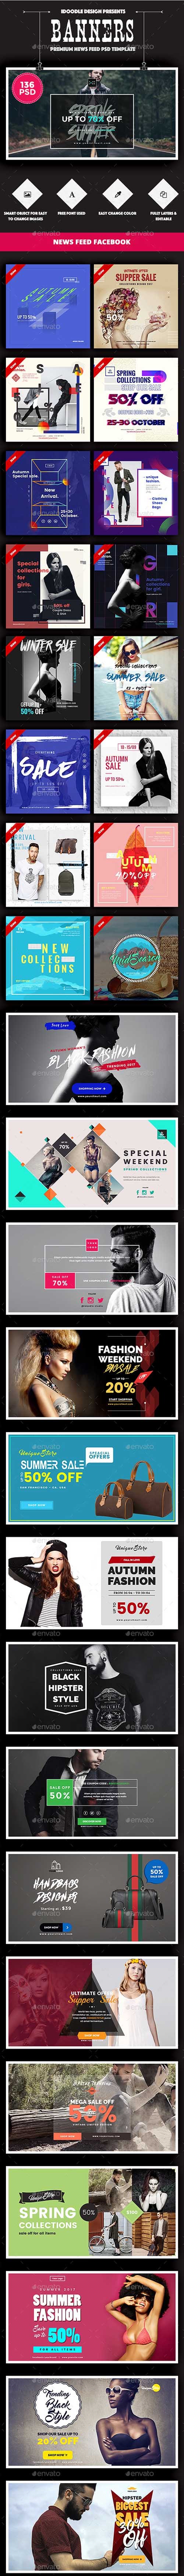 GR - Fashion Facebook Ad Banners - 136 PSD [02 Size Each] 16046080